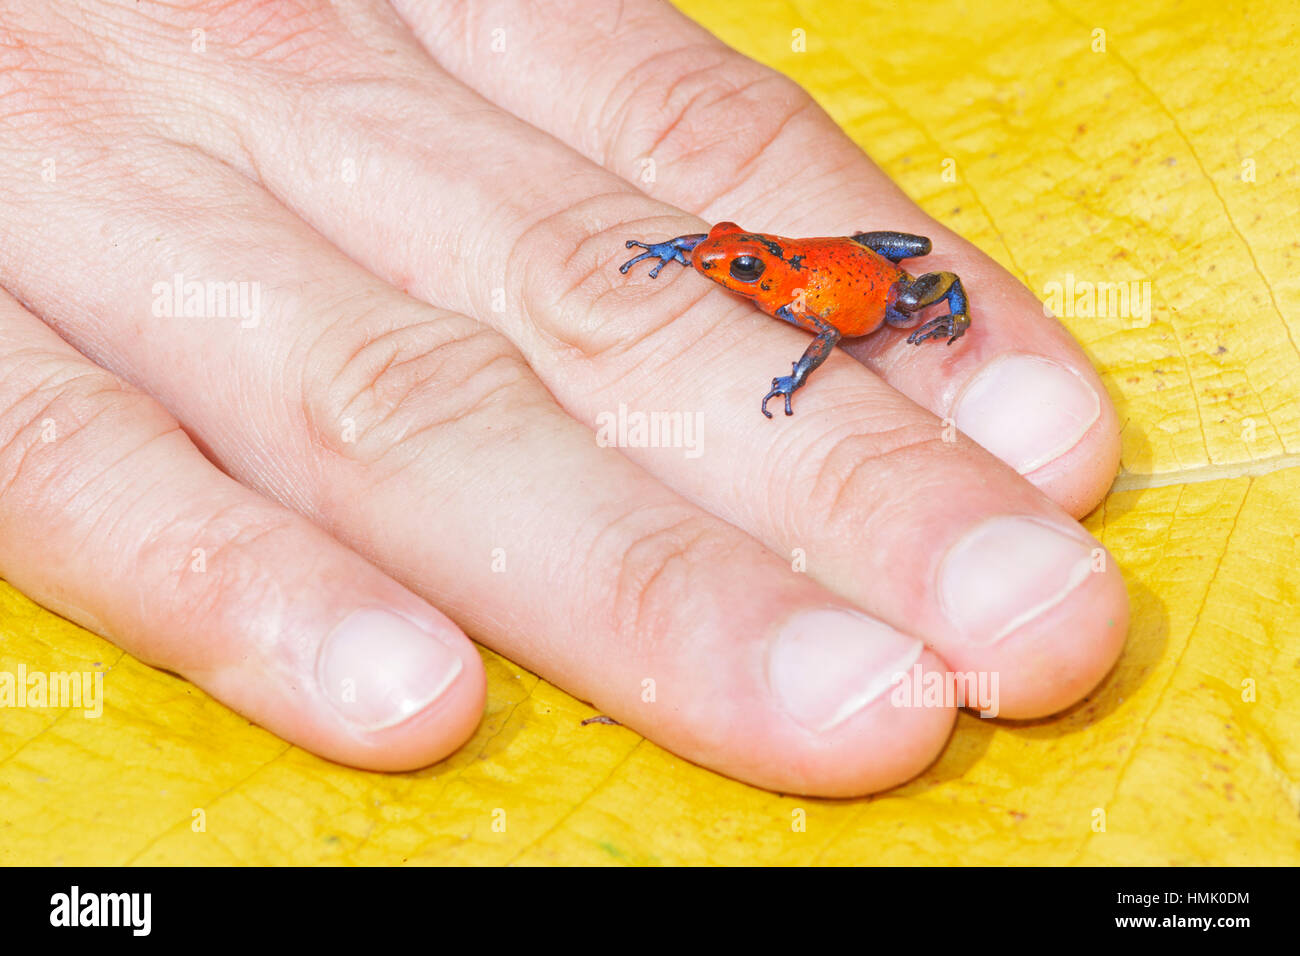 Blue jeans dart frog (Dendrobates pumilio) on hand, Costa Rica Stock Photo